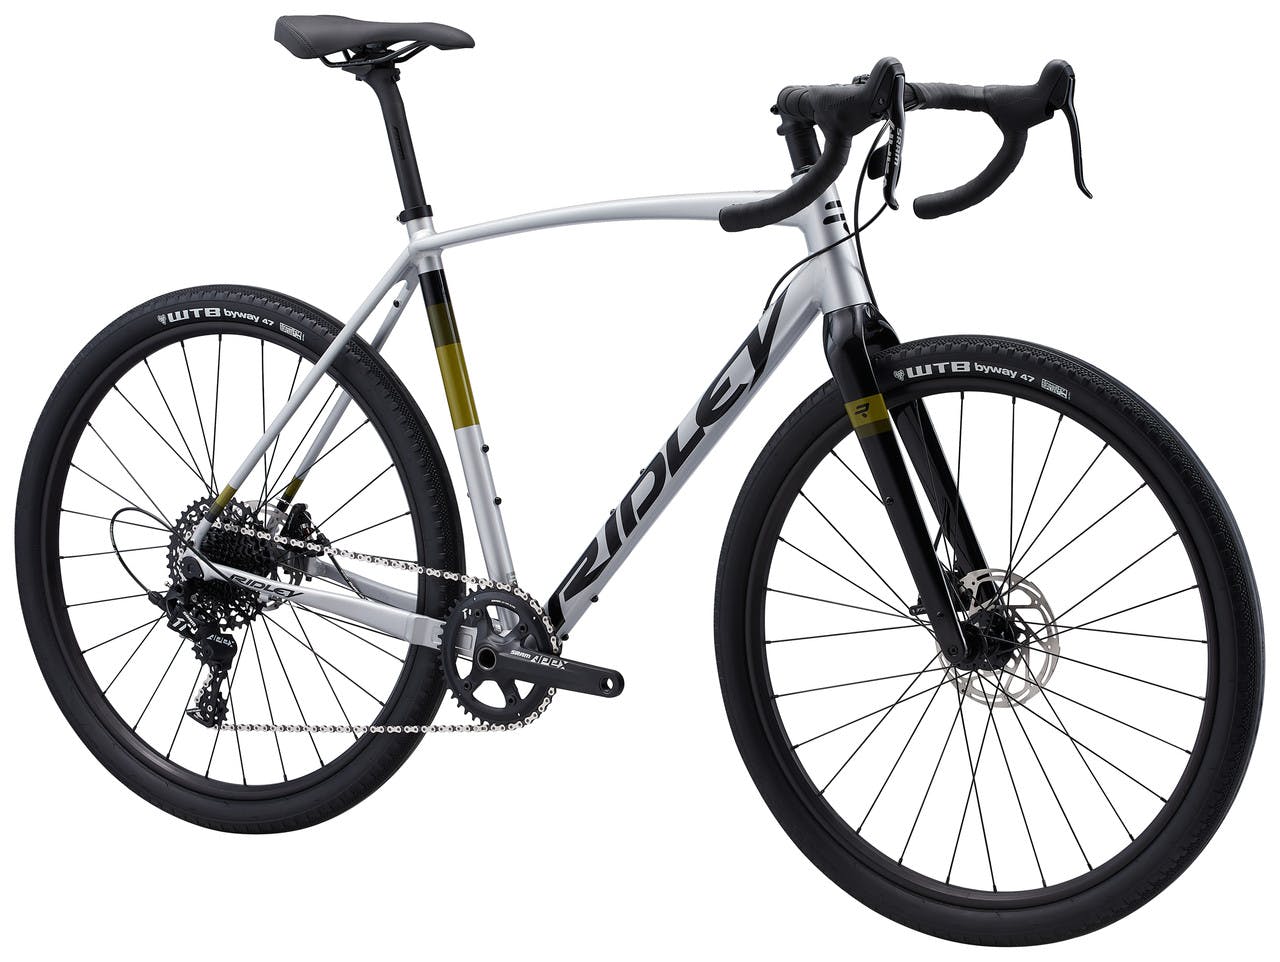 Kanzo A Apex 1 Bicycle Silver/Black/Camouflage